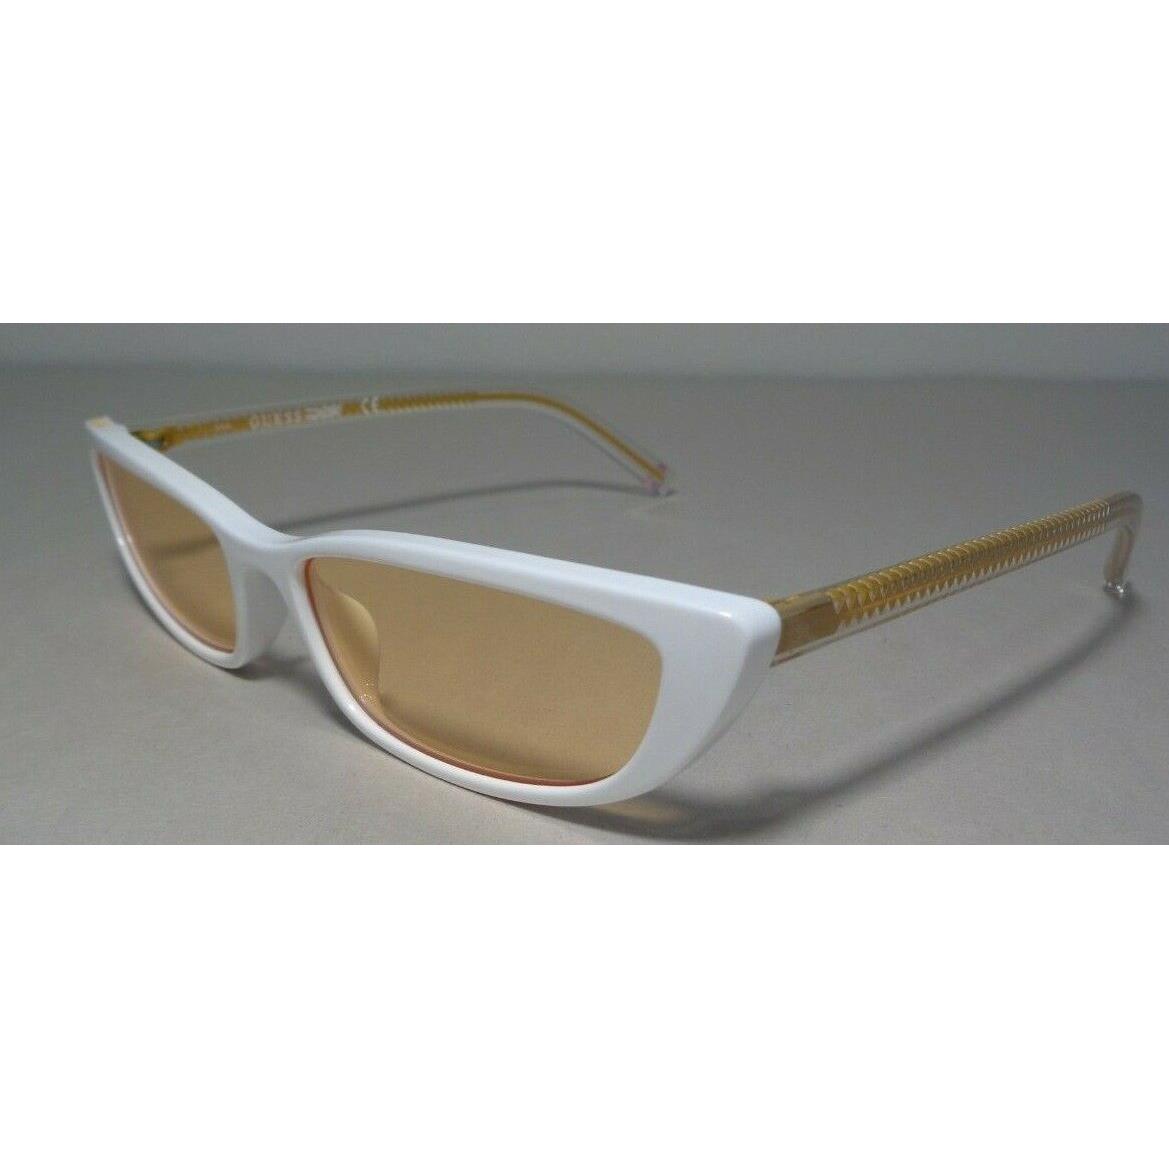 Guess sunglasses  - Frame: White 4